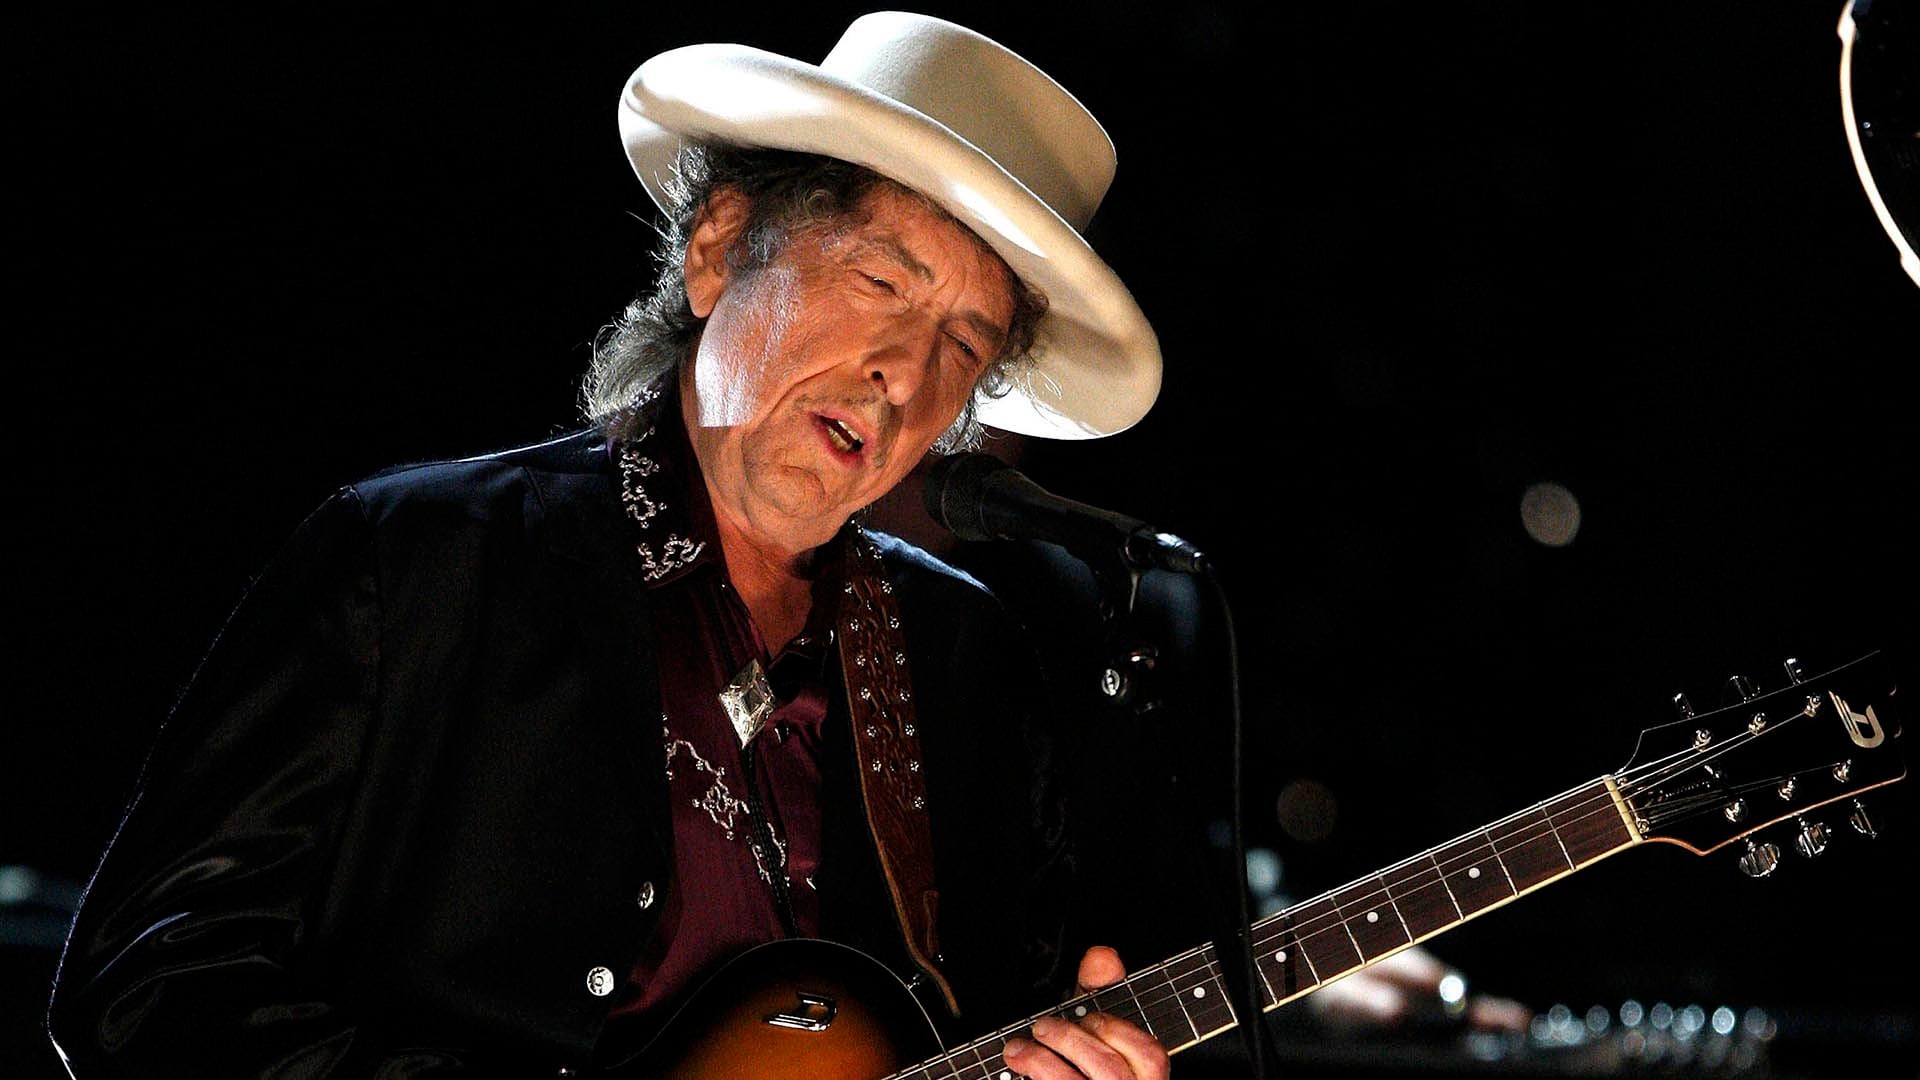  Bob Dylan  (AFP PHOTO / GETTY IMAGES NORTH AMERICA / KEVIN WINTER)